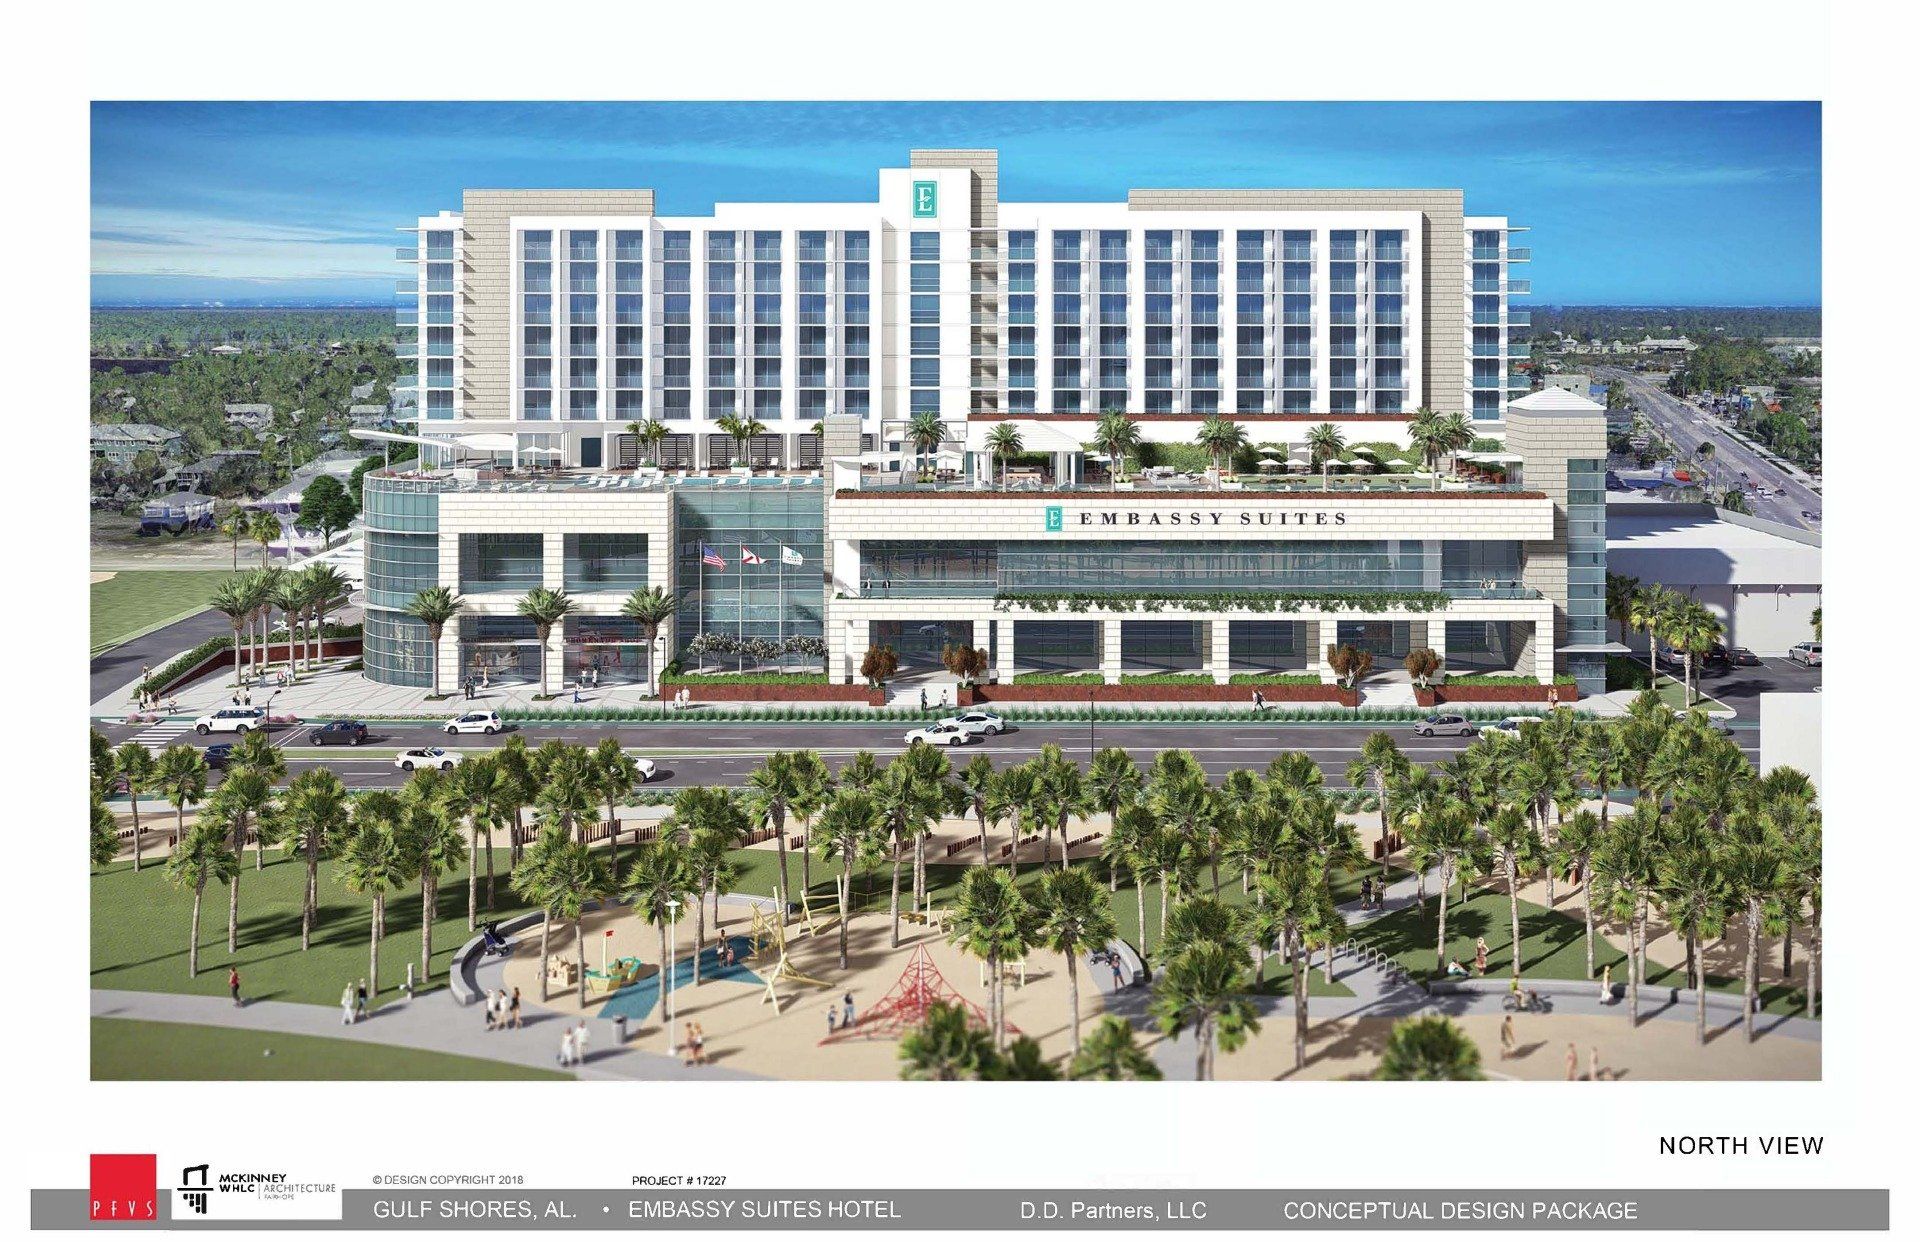 Rendering of an Embassy Suites planned for Gulf Shores, Alabama.